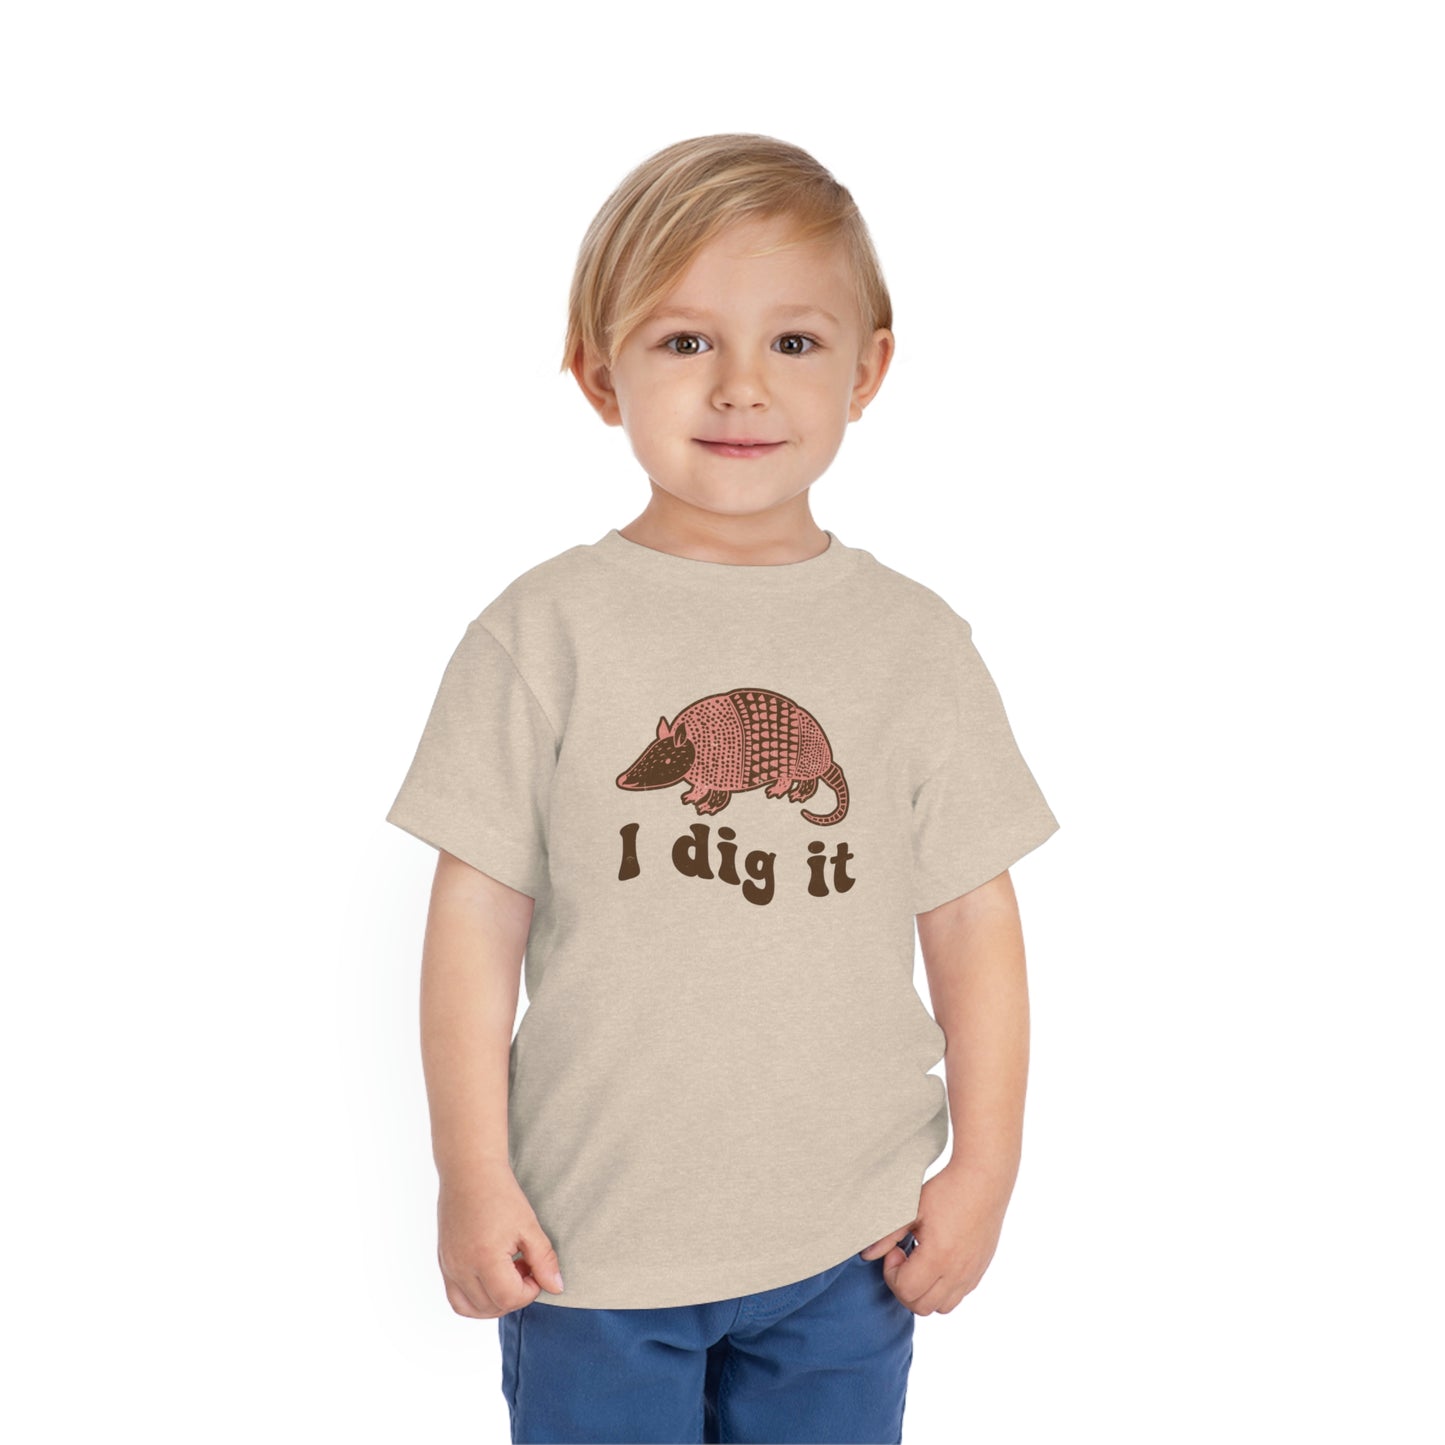 "I Dig It" Toddler Short Sleeve Tee (2T-5T)